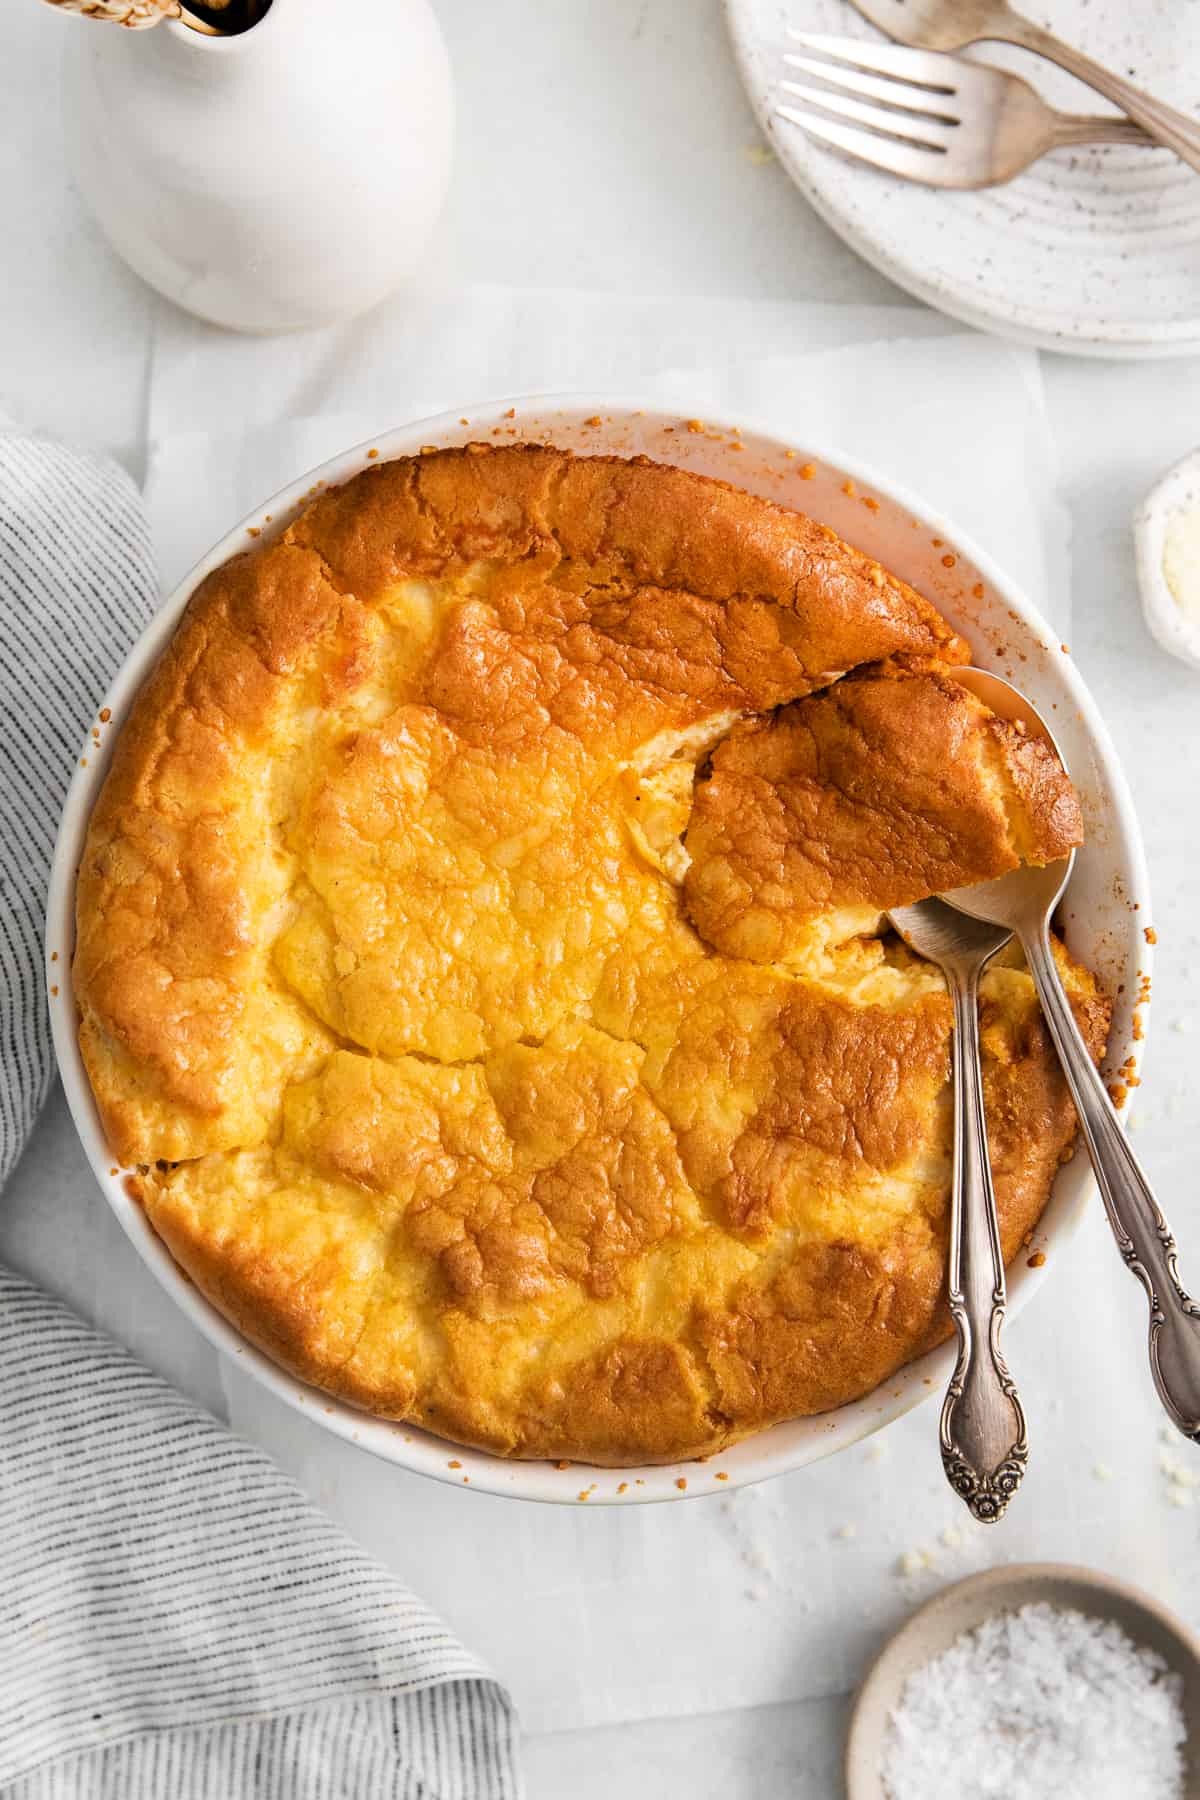 Cheese souffle in a round casserole dish.